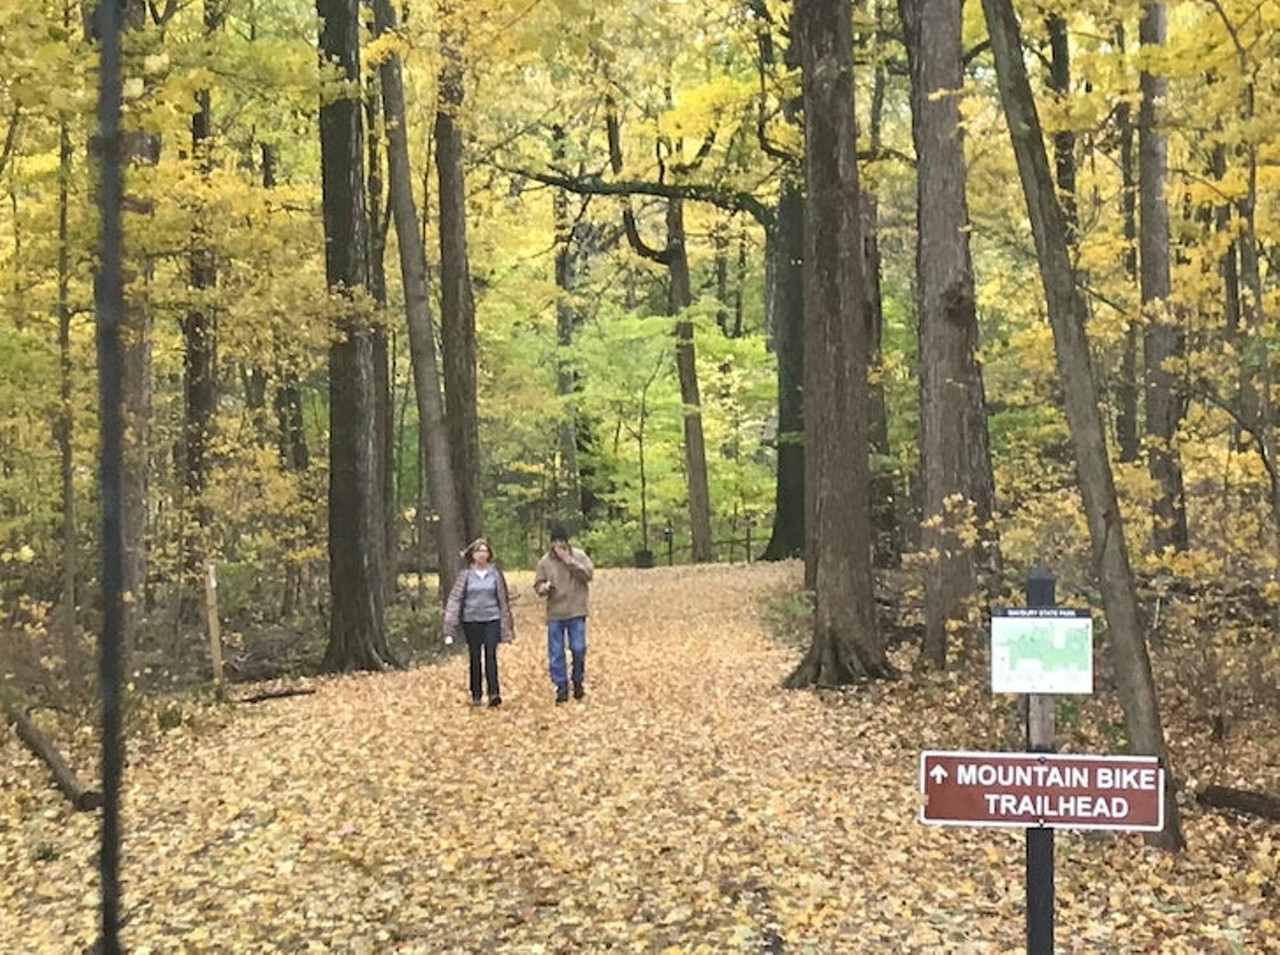 Maybury State Park
49601 Eight Mile Rd., Northville; 248-349-8390; dnr.state.mi.us
Connect with nature at Maybury State Park by exploring the park's miles of trails spanning nearly 1,000 acres of gently rolling terrain, open meadow, and mature forest.